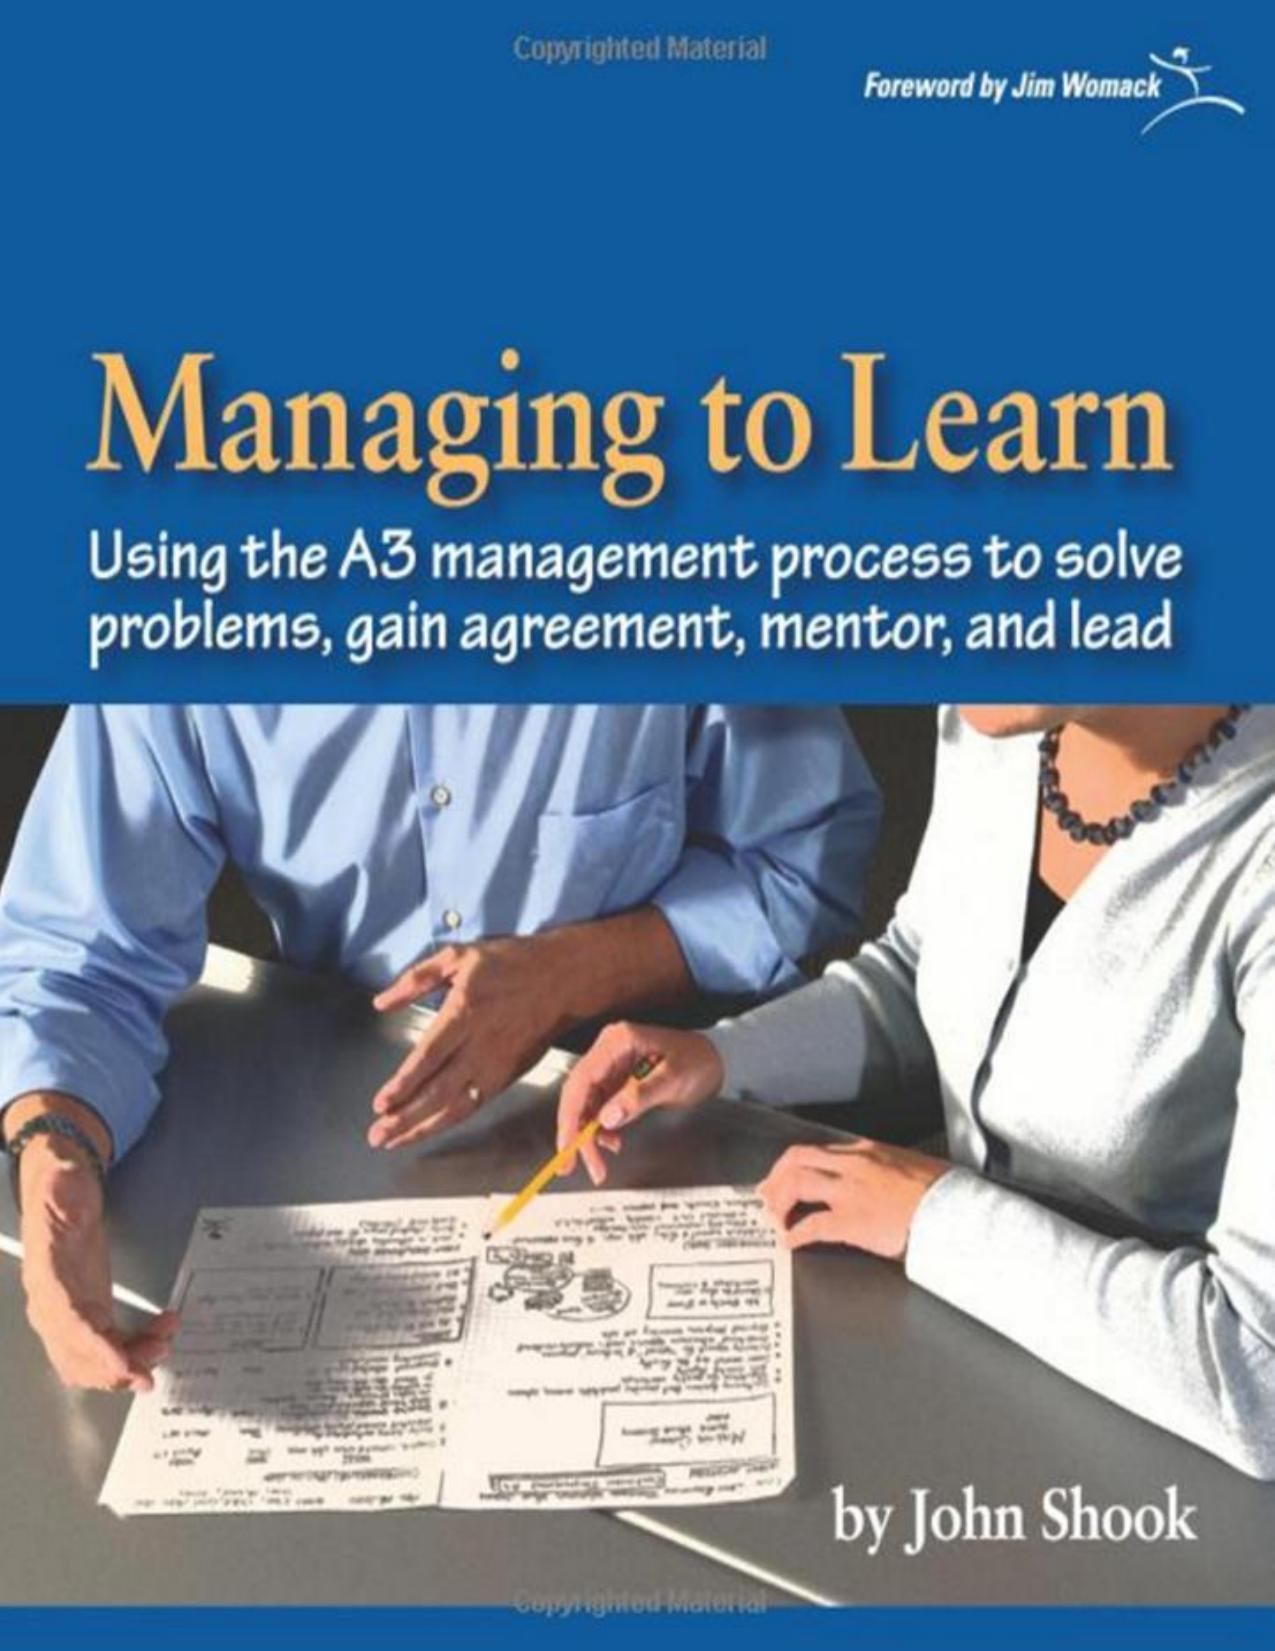 Managing to Learn: Using the A3 Management Process to Solve Problems, Gain Agreement, Mentor and Lead